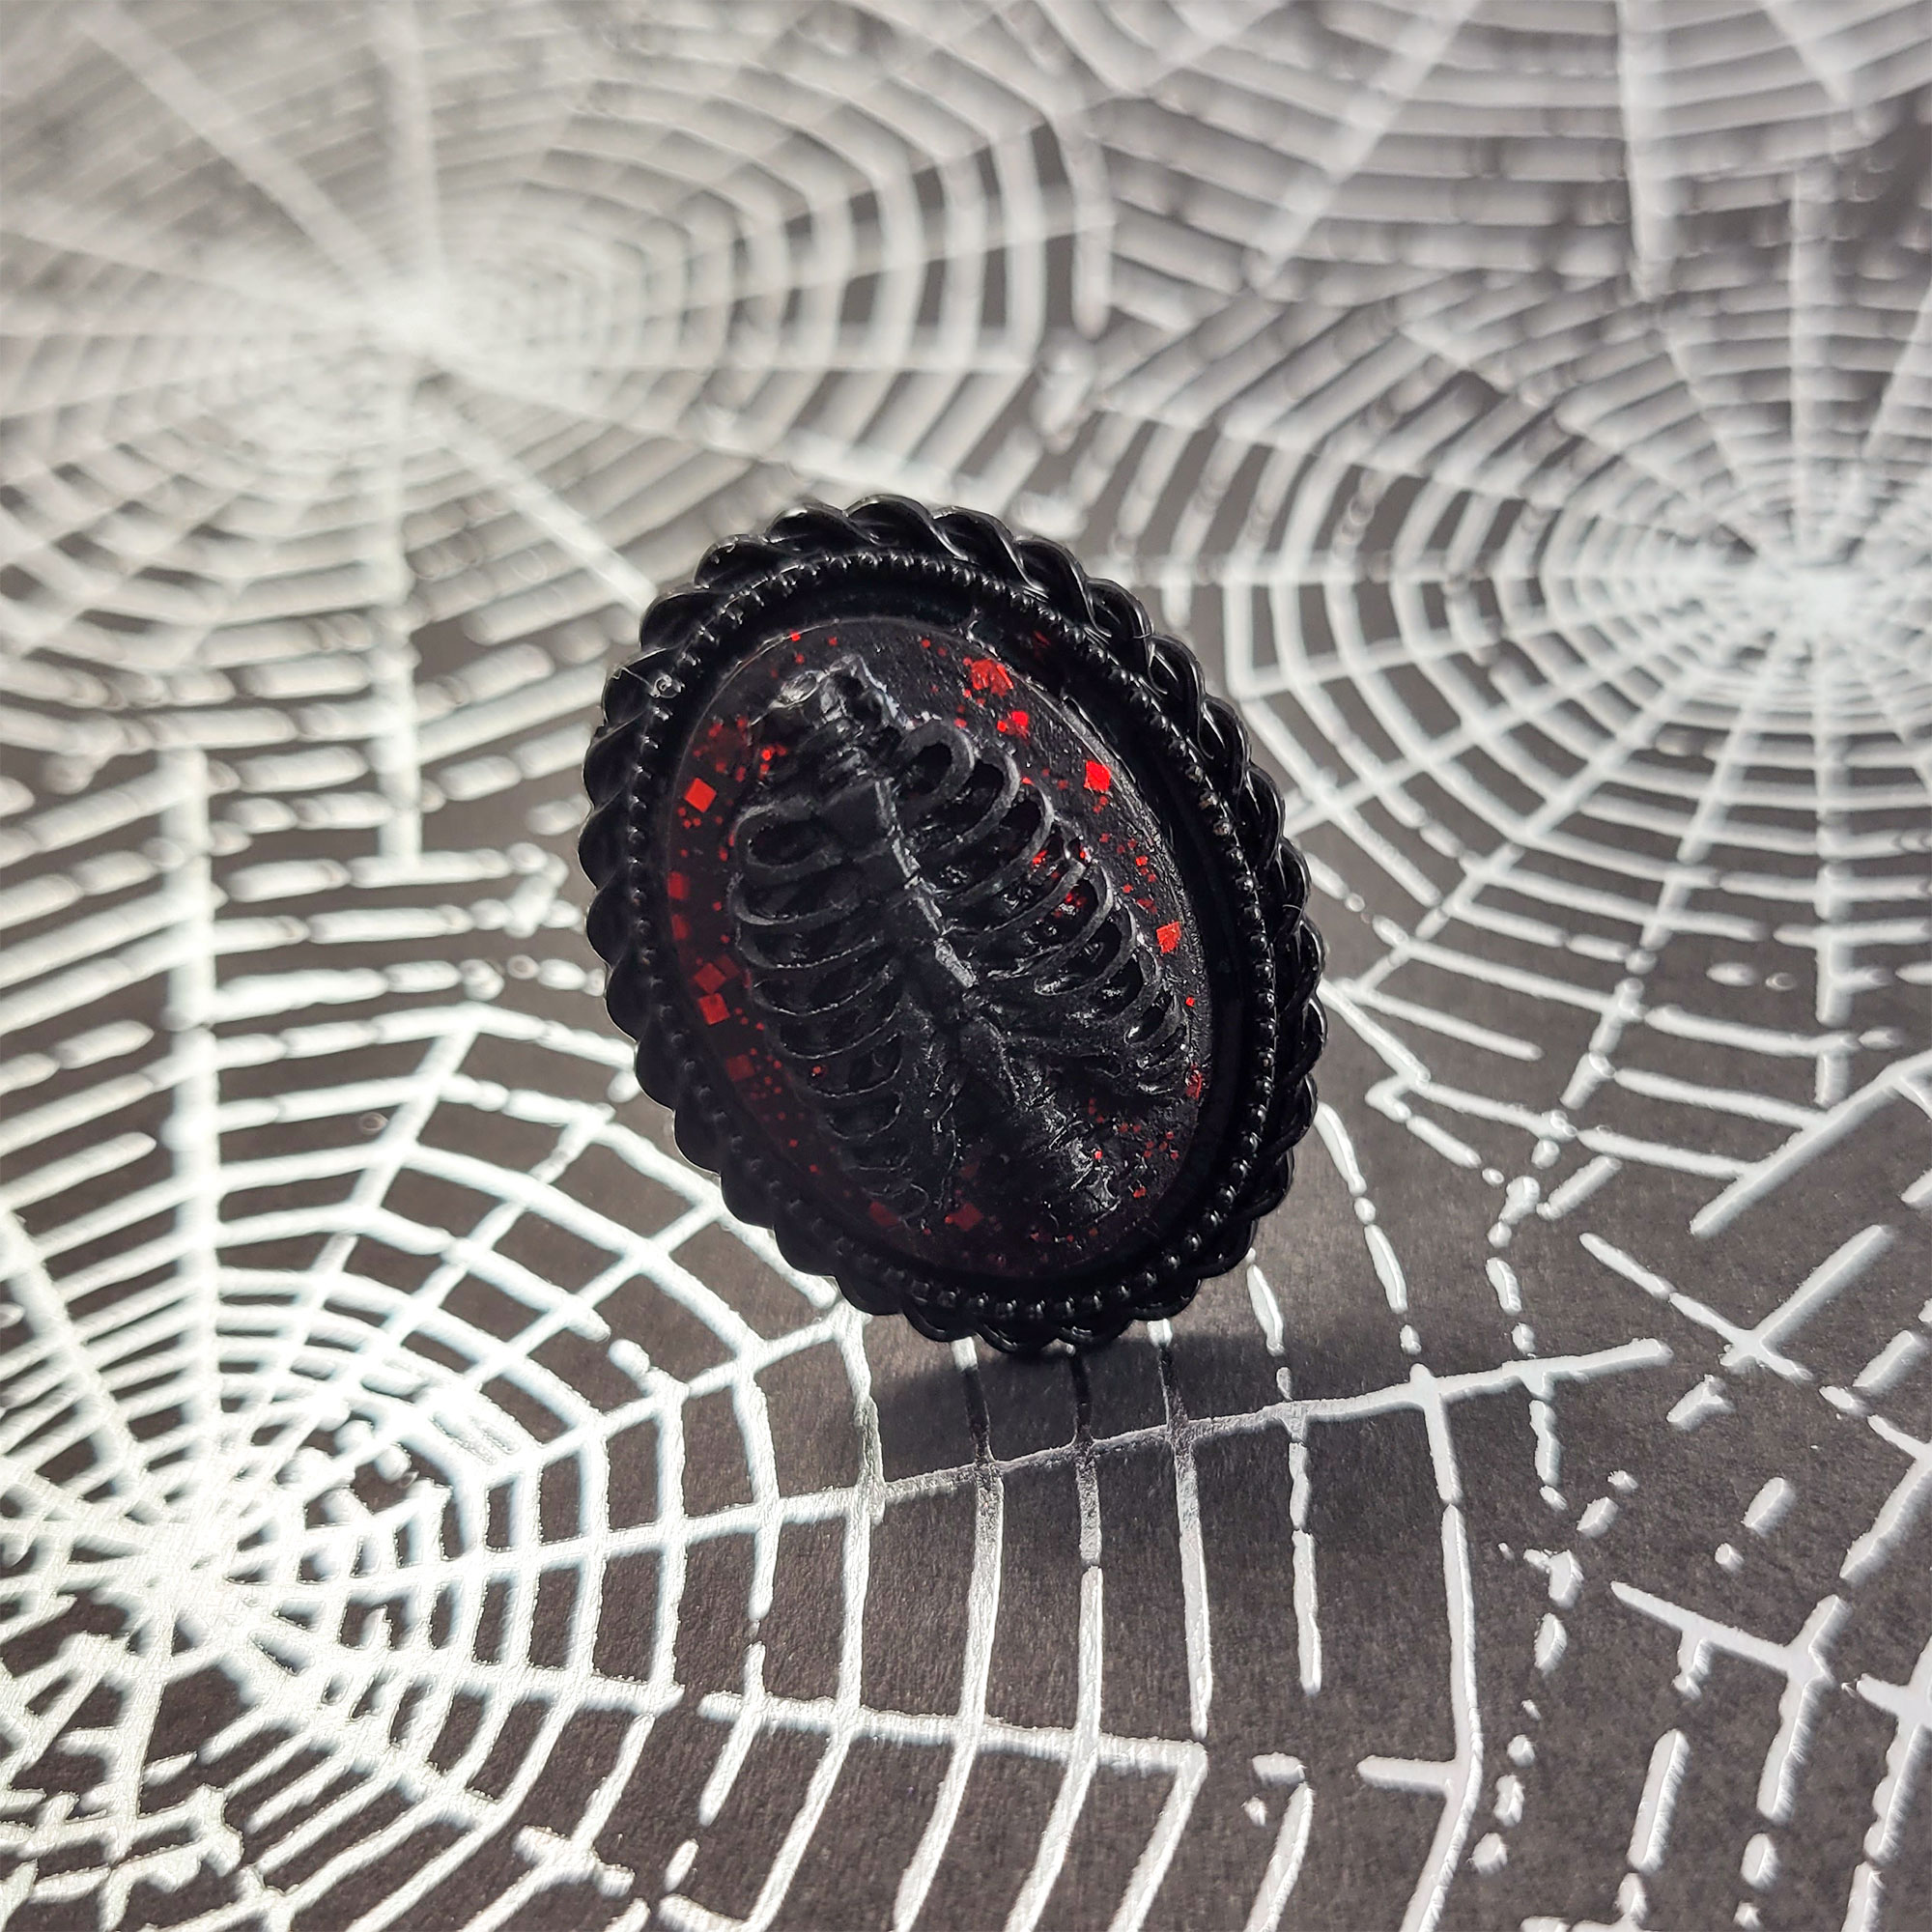 Black & Red Bare Bones Cameo Ring by Wilde Designs